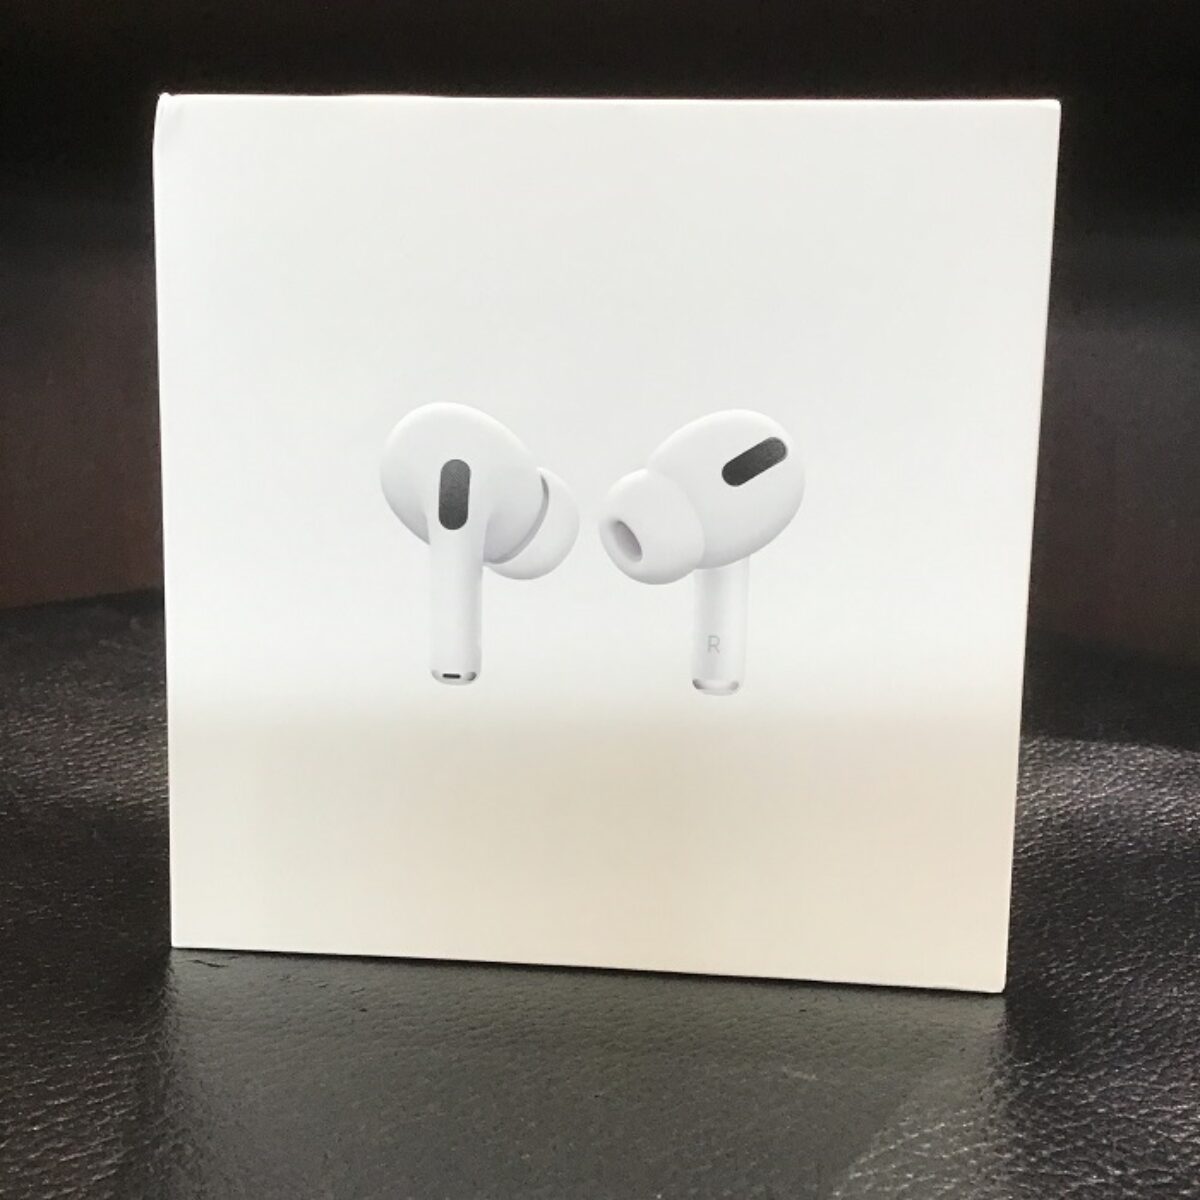 MWP22J/A エアーポッズプロ Apple AirPodsPro 新品airpods